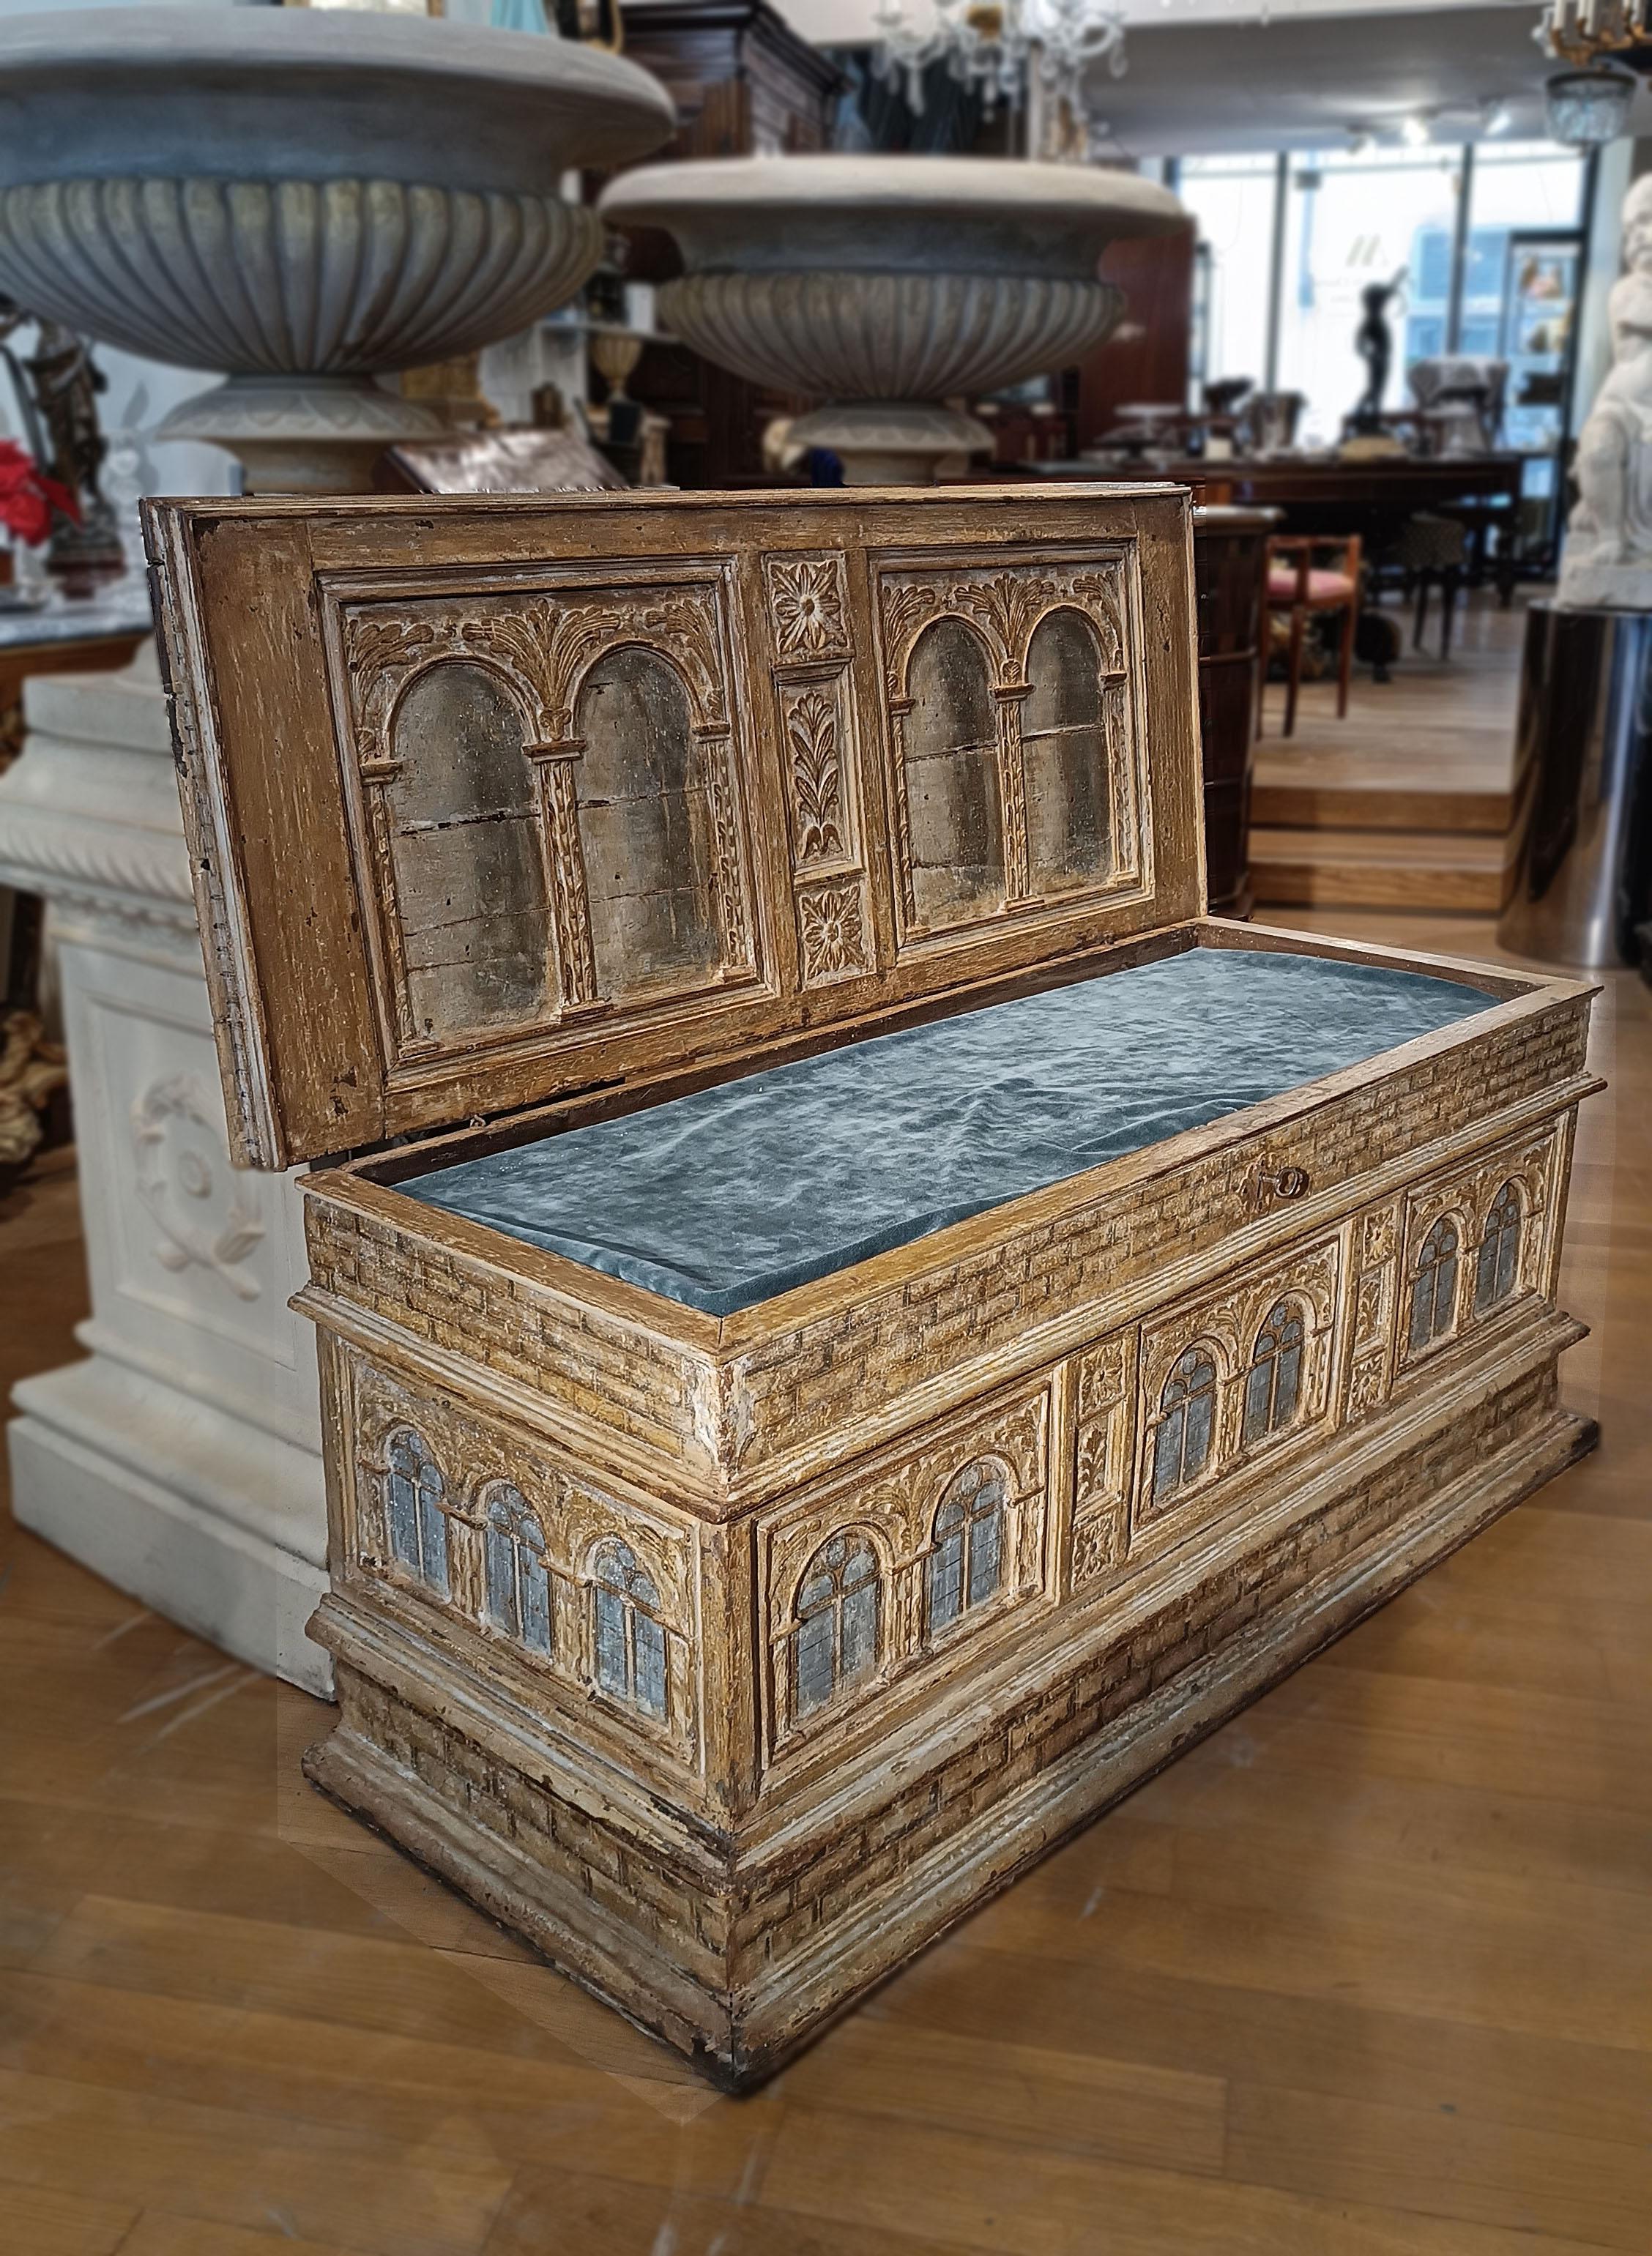 This Renaissance chest is made of fine carved and painted walnut wood with a chalky background. The decorative motifs follow the model of the prestigious Palazzo Strozzi in Florence, and give an atmosphere of elegance and refinement to the